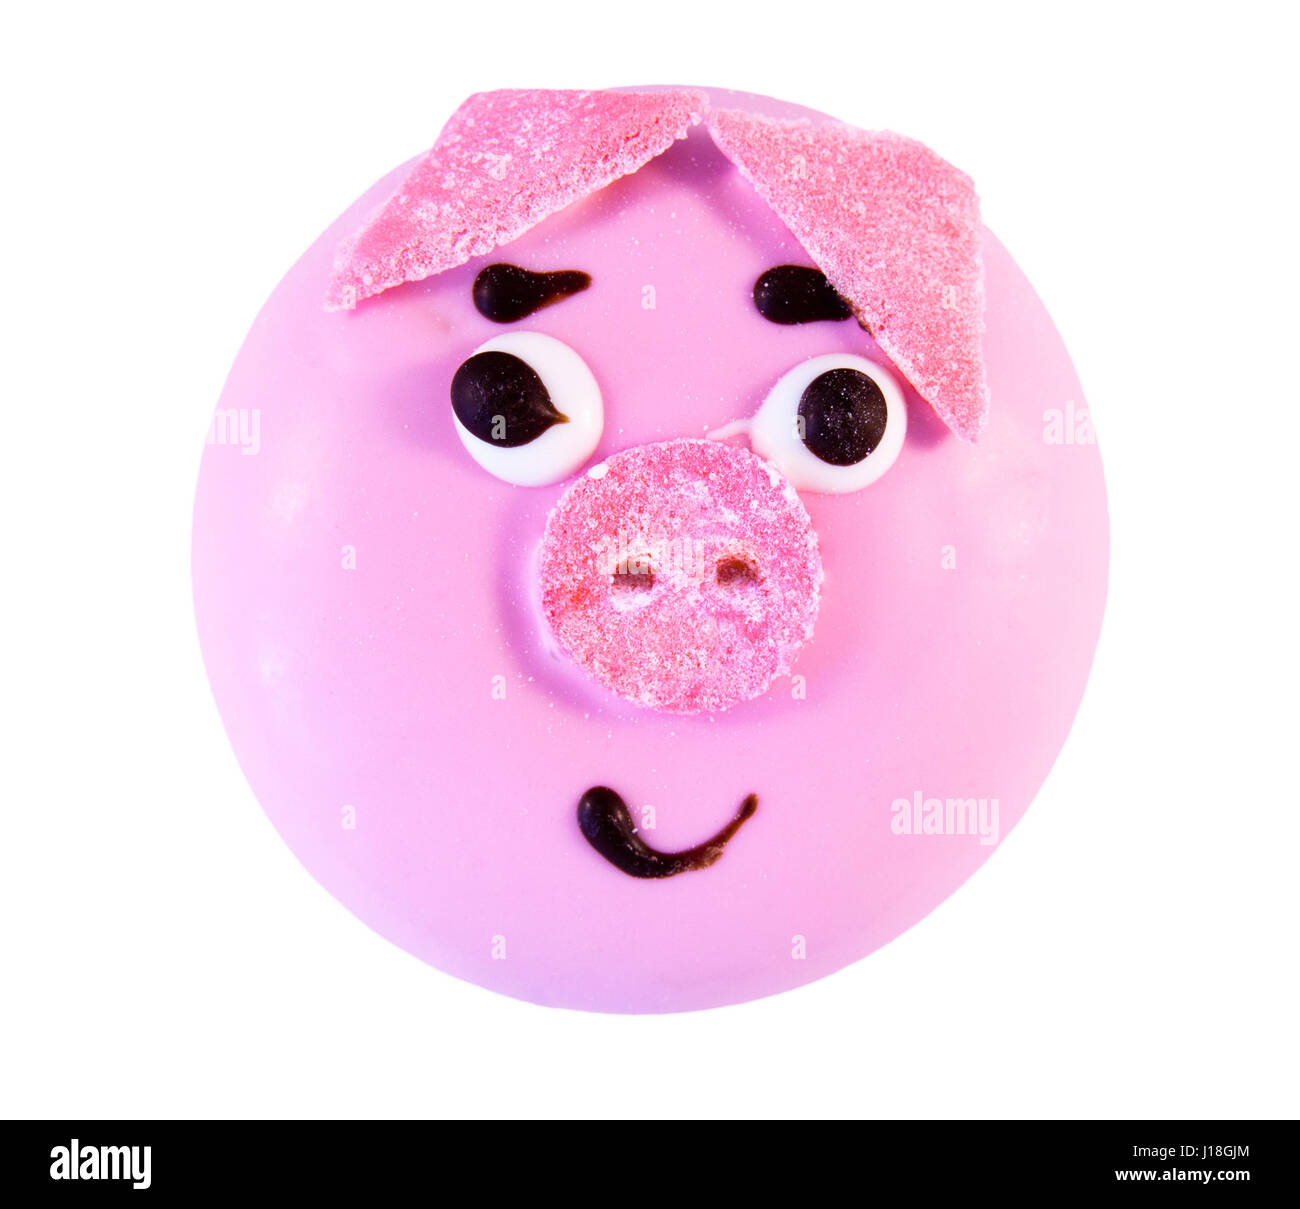 Biscuit with pig face isolated on a white background Stock Photo